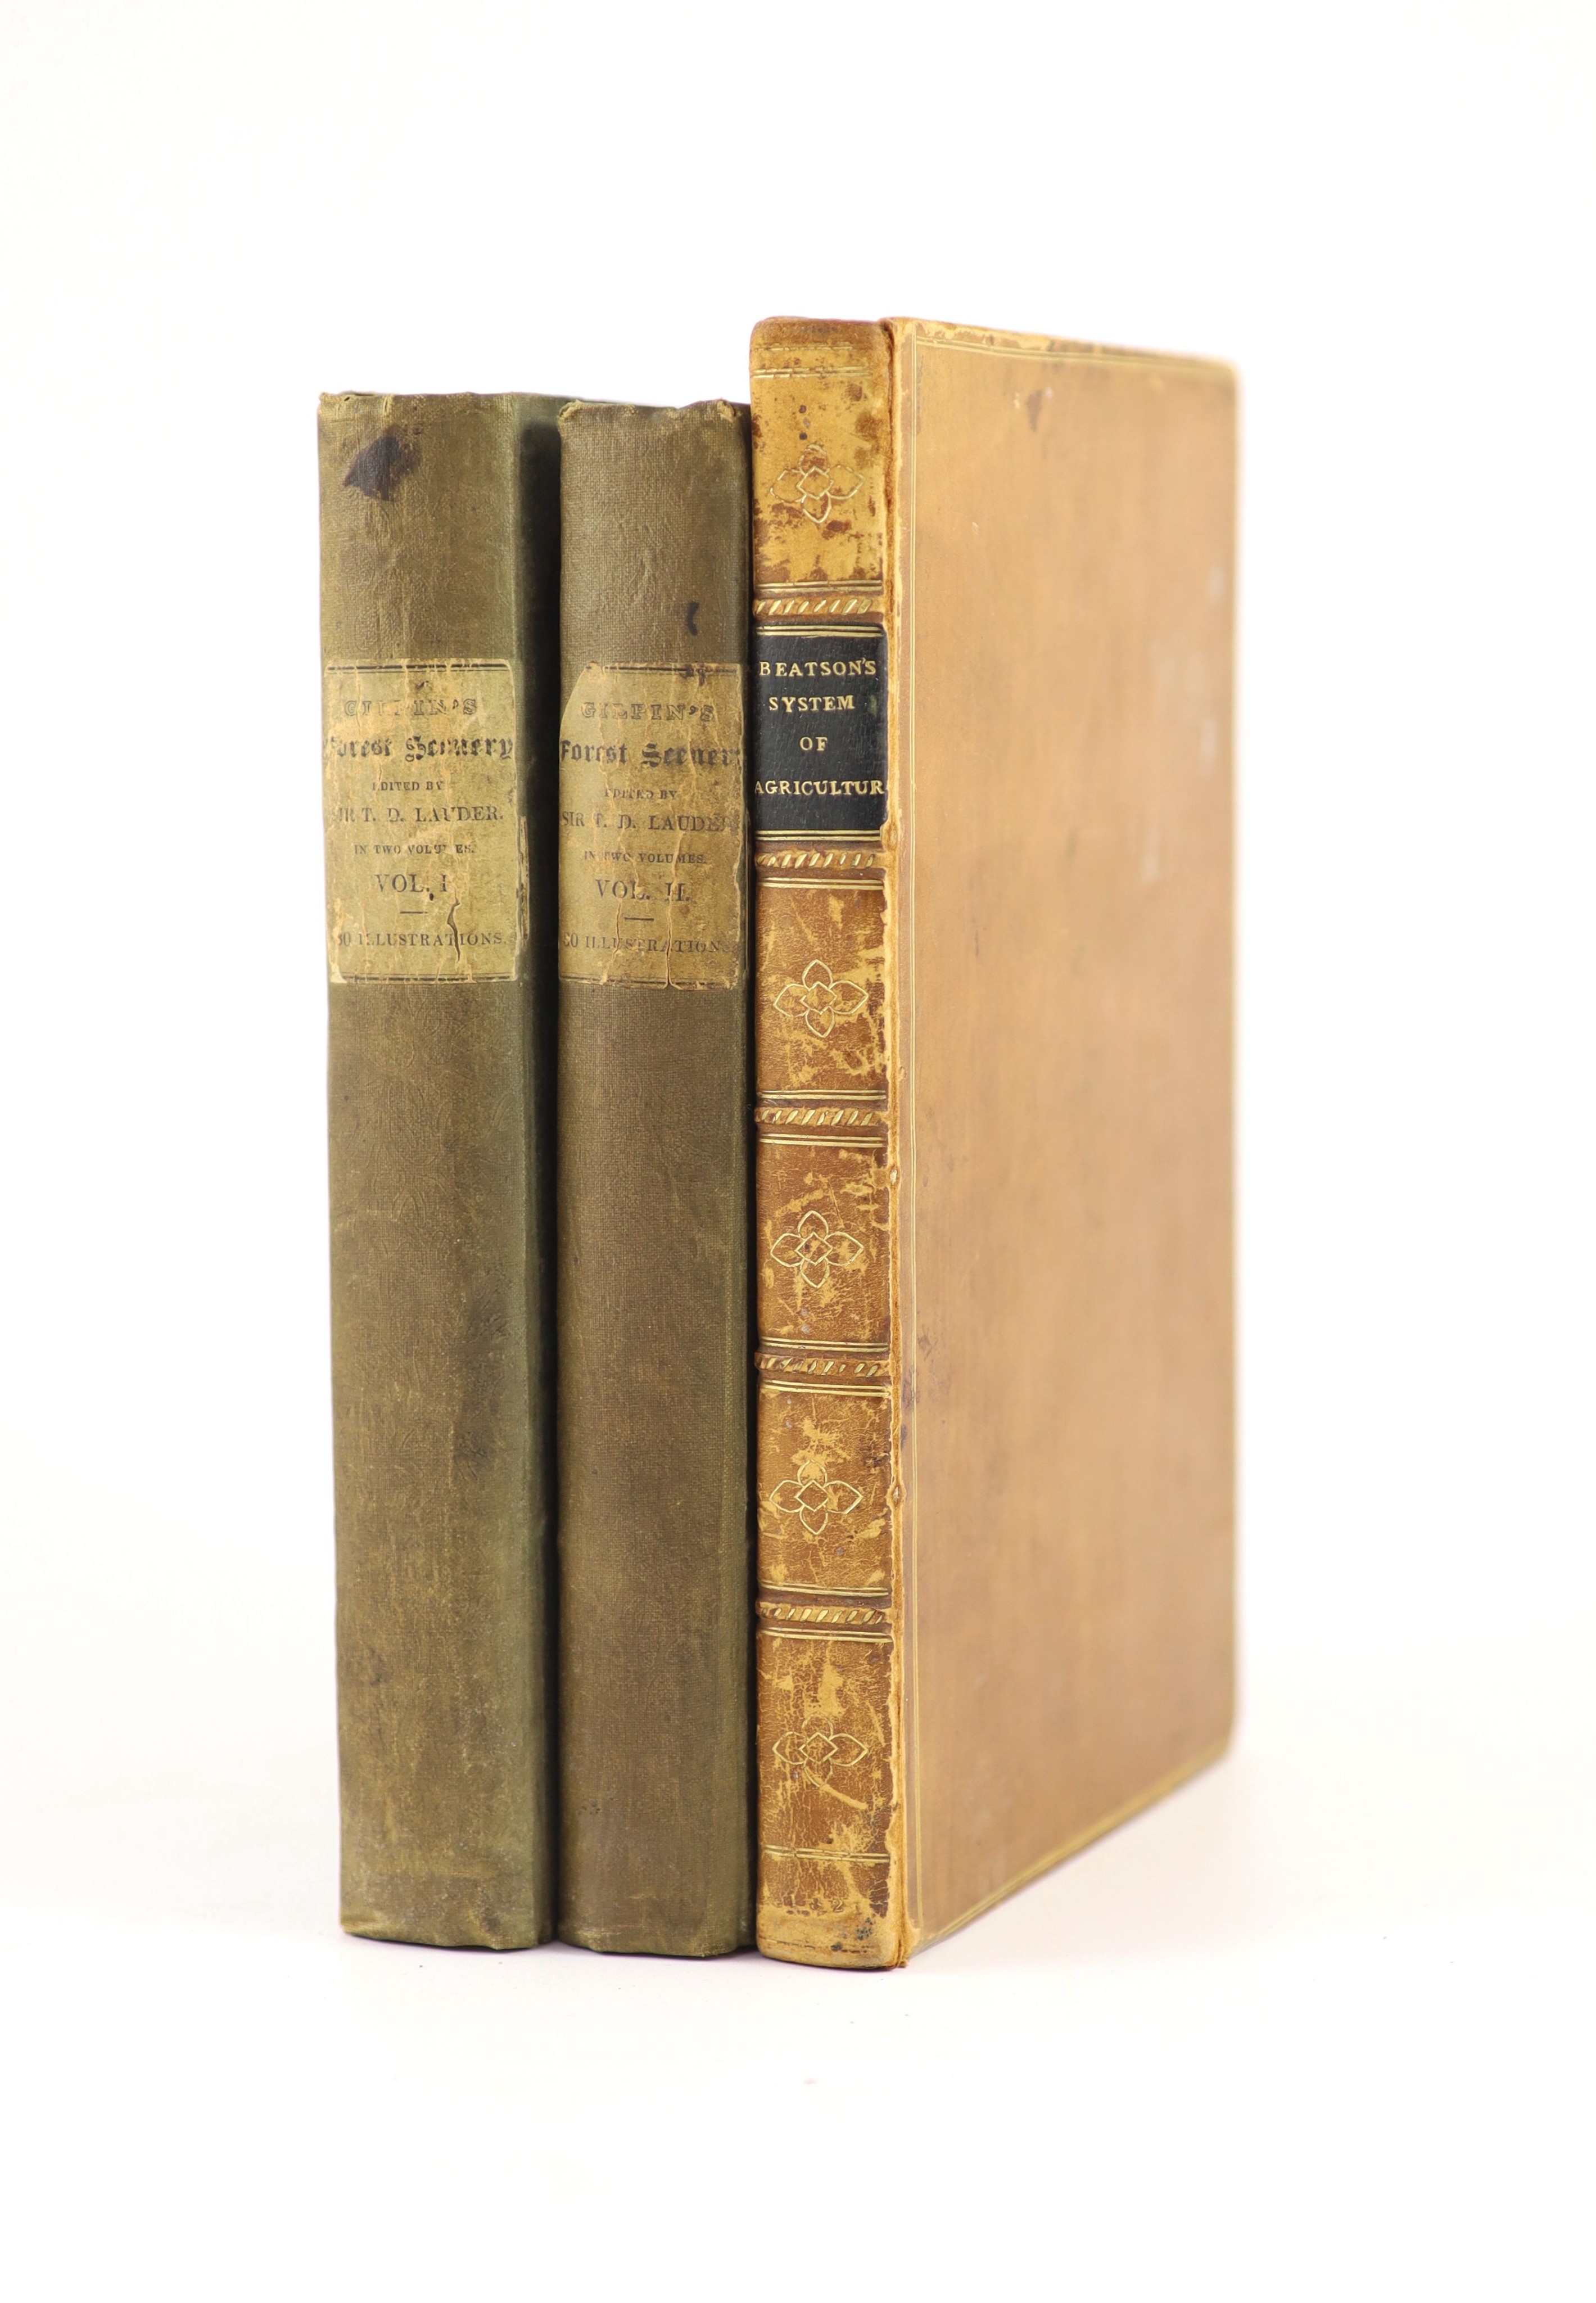 Gilpin, William - Remarks on Forest Scenery and other Woodland Views, 2 vols, 8vo, quarter bound stiff paper boards, Fraser & Co., Edinburgh, 1834 and Beatson, Major General Alexander - A New System of Cultivation, 2nd e